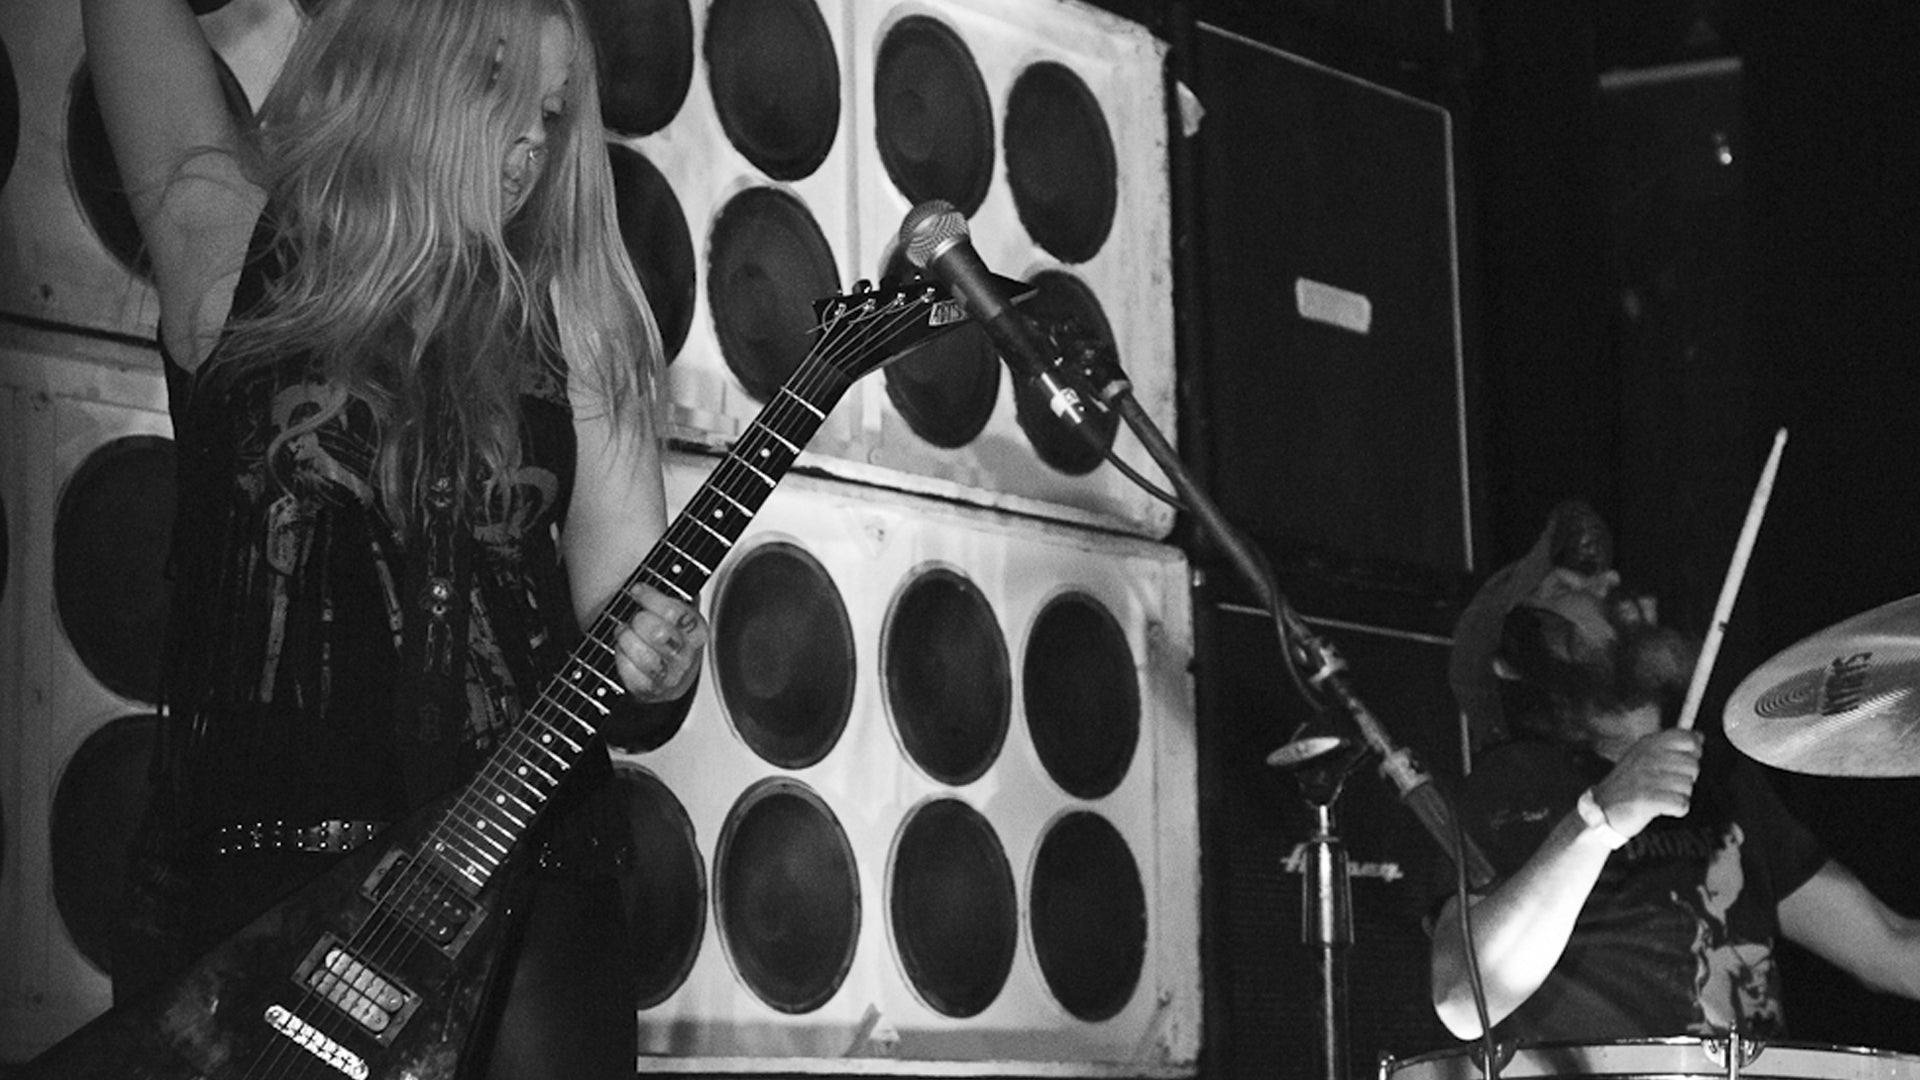 PITCHFORK FEATURE ON JUCIFER AND HOW THEY INSPIRED ACADEMY AWARD WINNING "SOUND OF METAL"